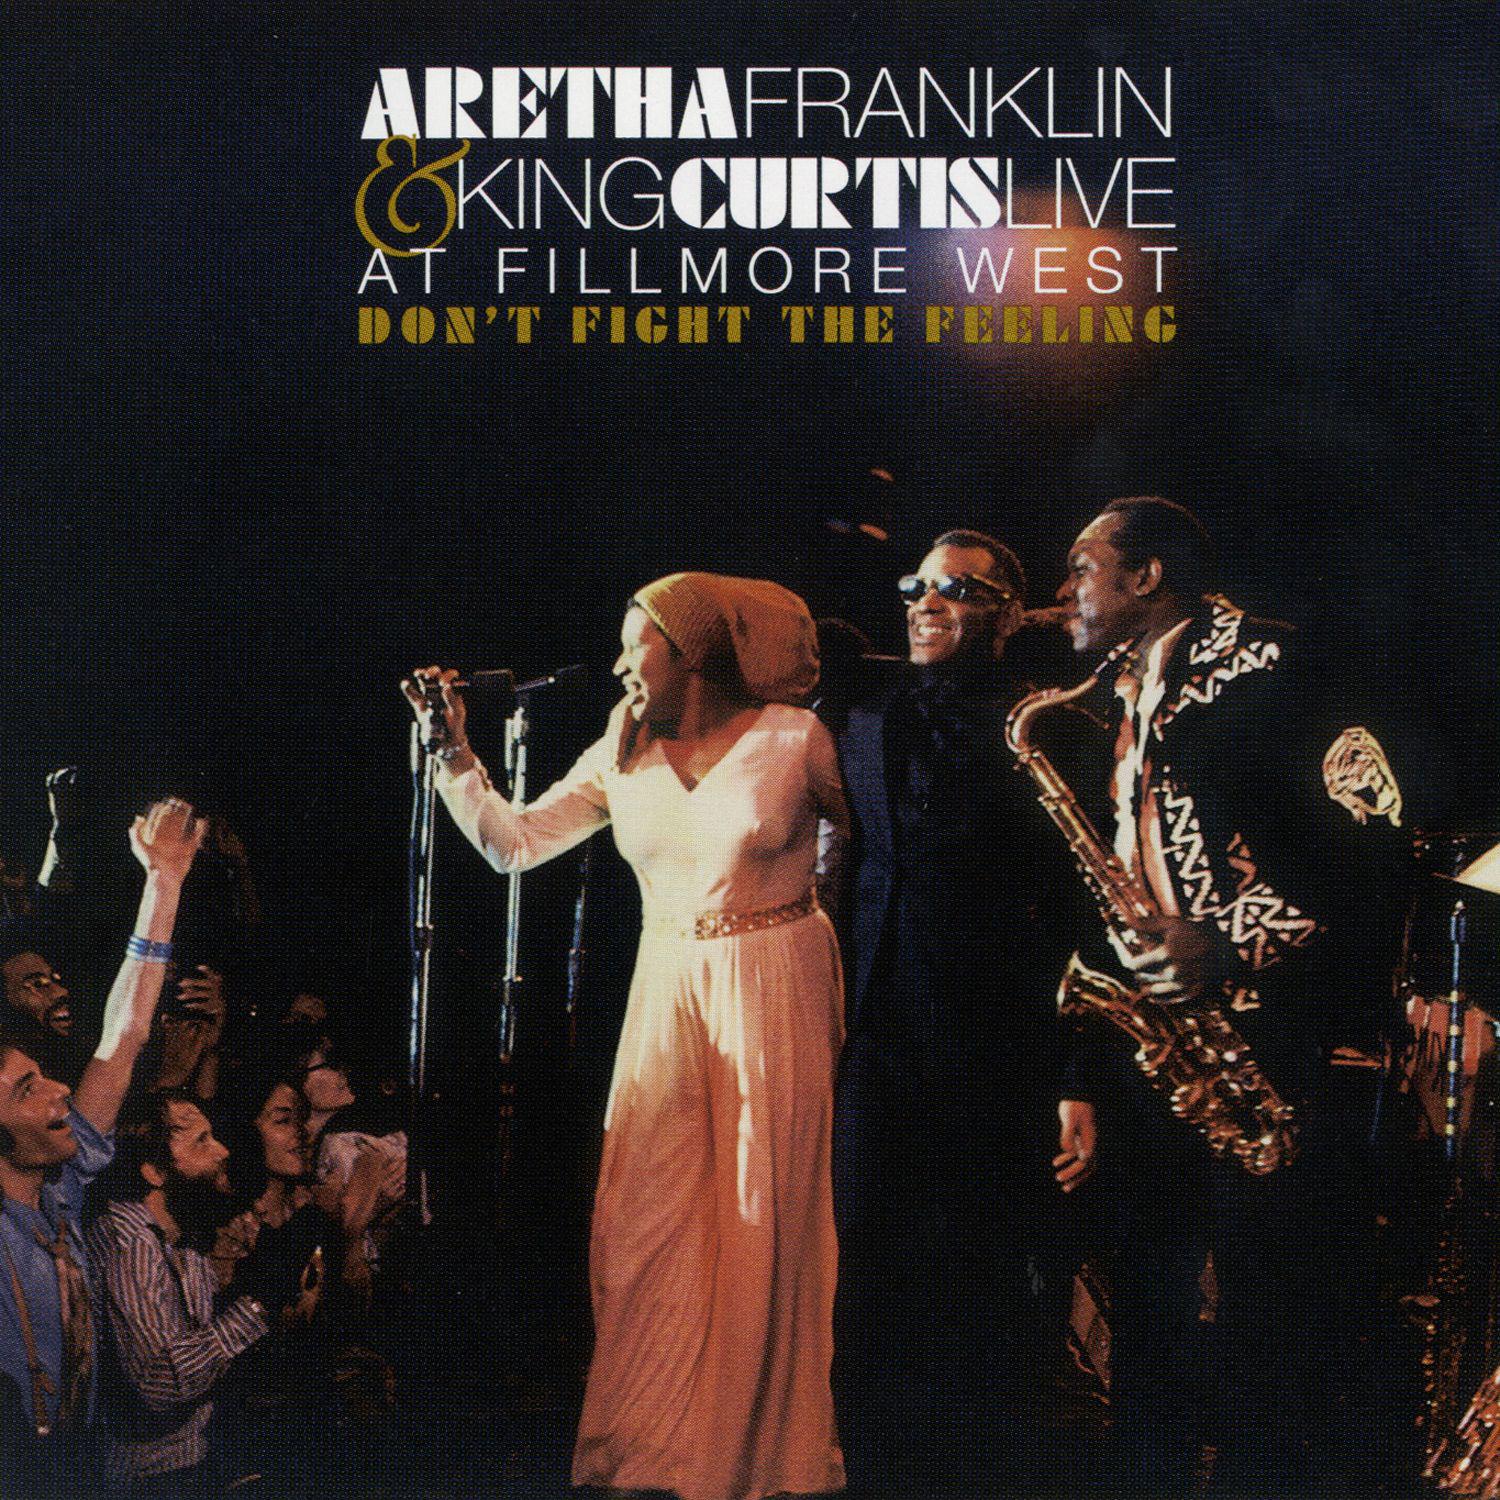 Share Your Love With Me (Live at Fillmore West, San Francisco, CA, 3/7/1971)